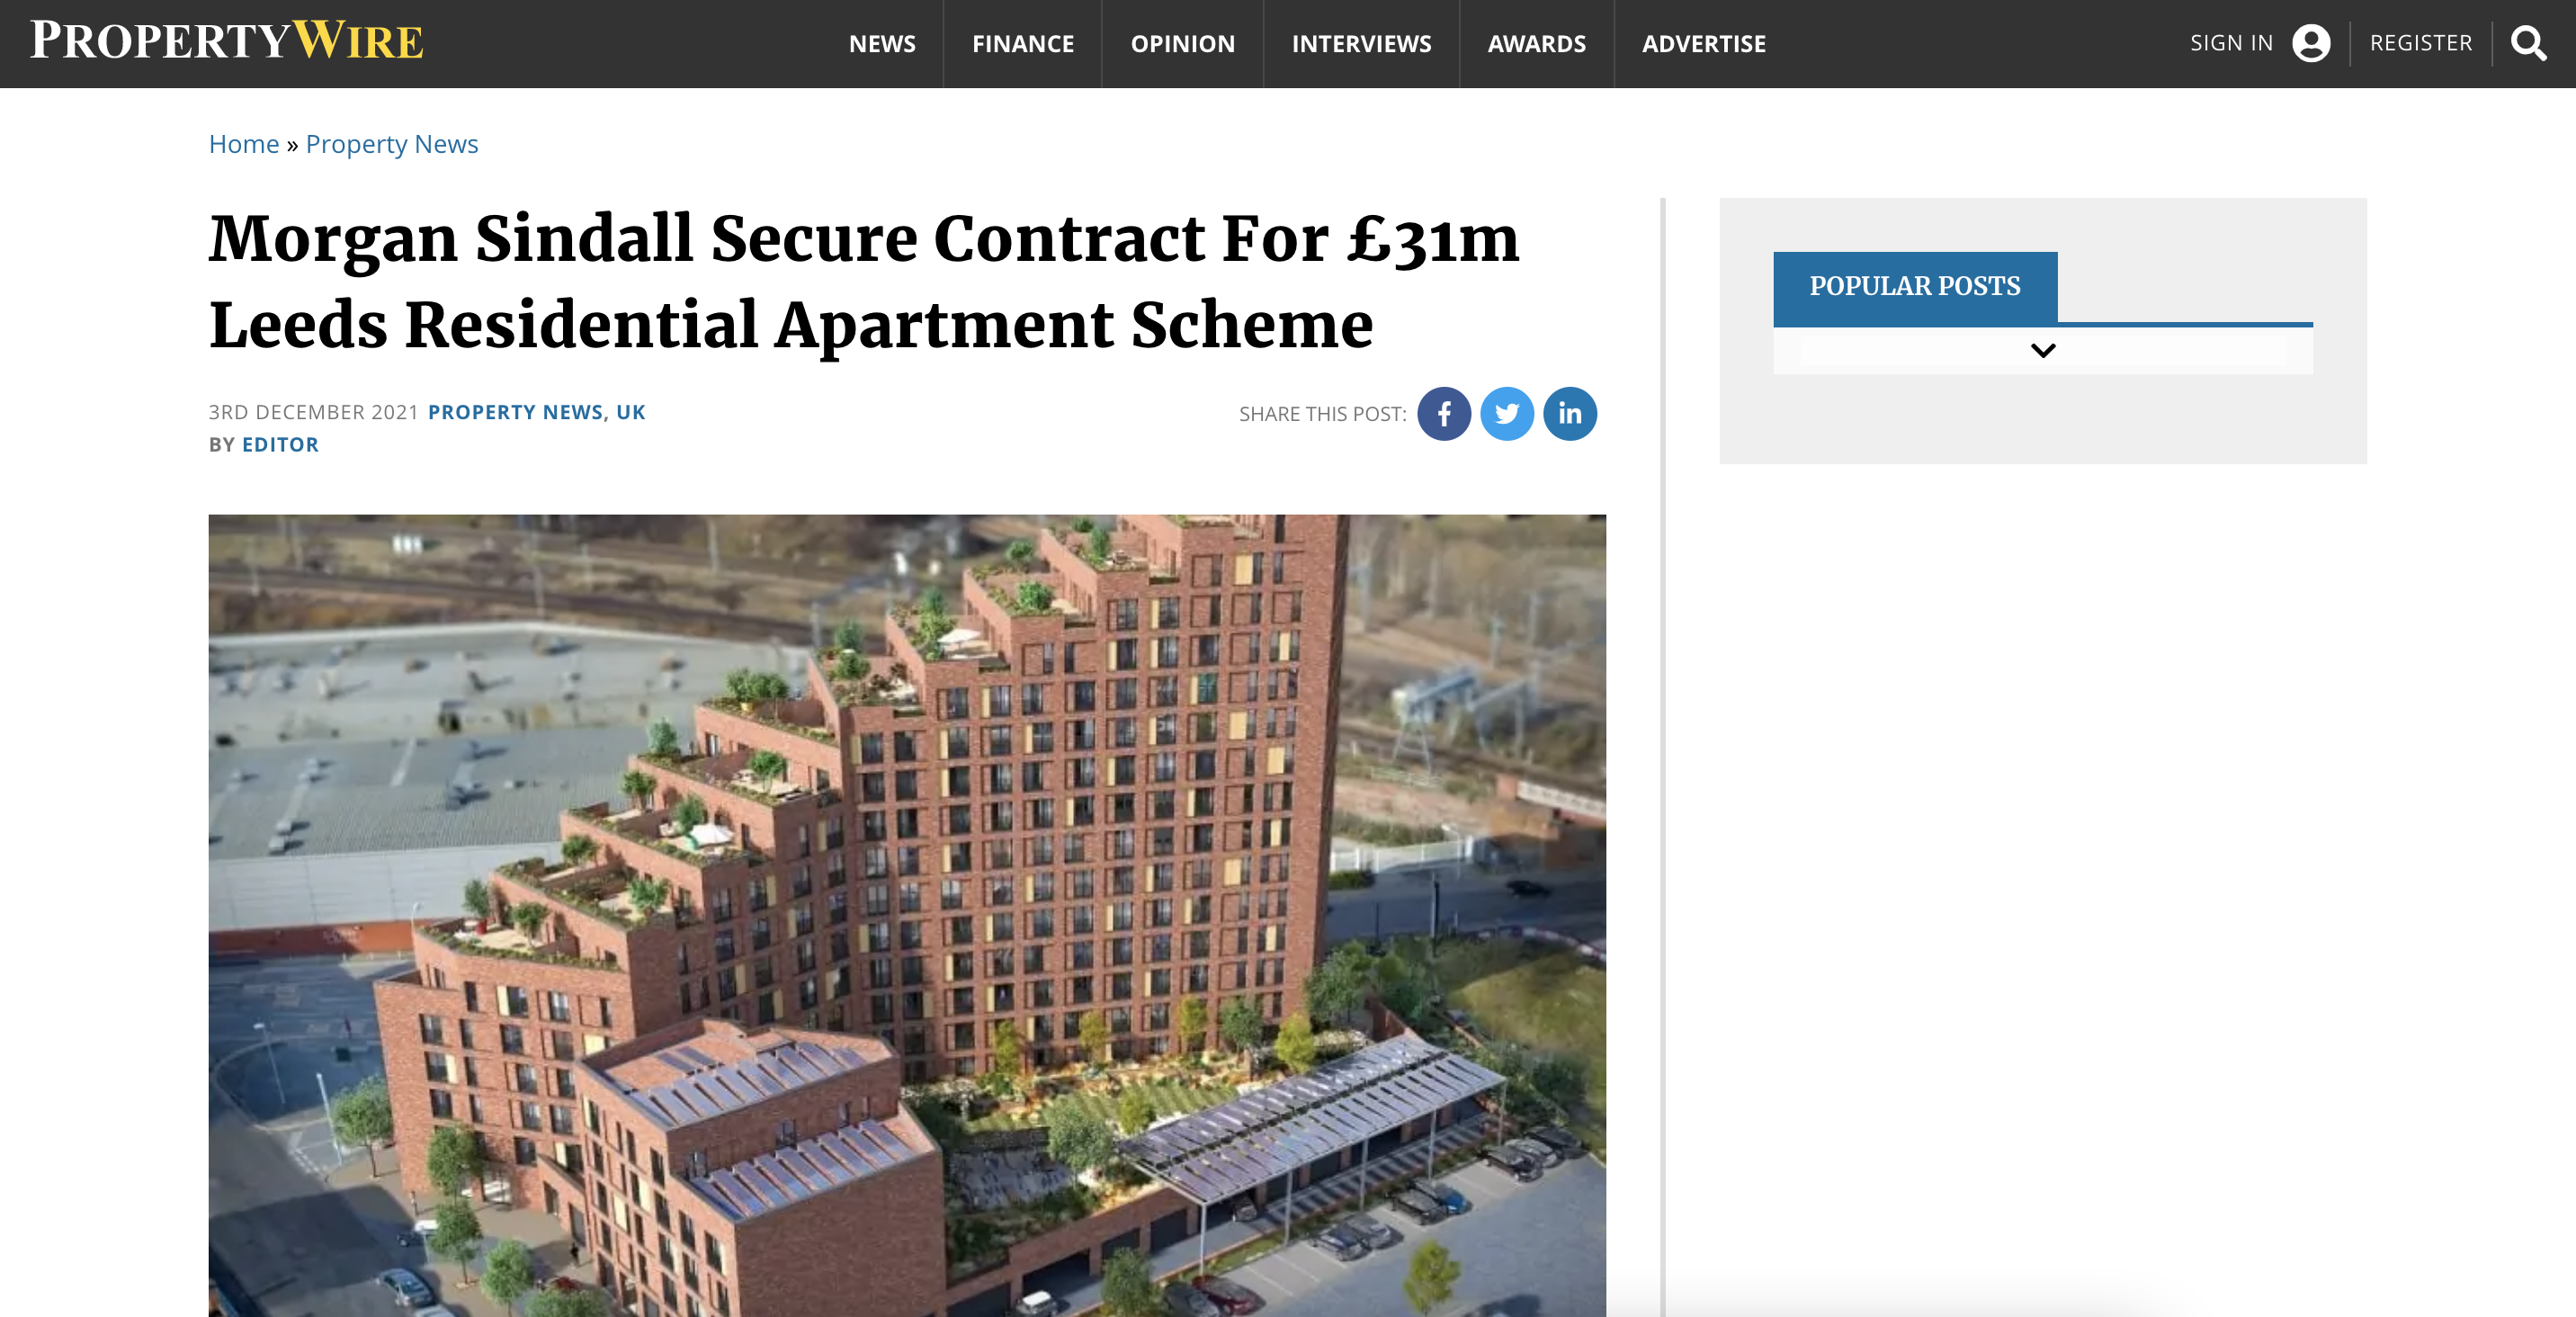 Morgan Sindall Secure Contract For £31m Leeds Residential Apartment Scheme